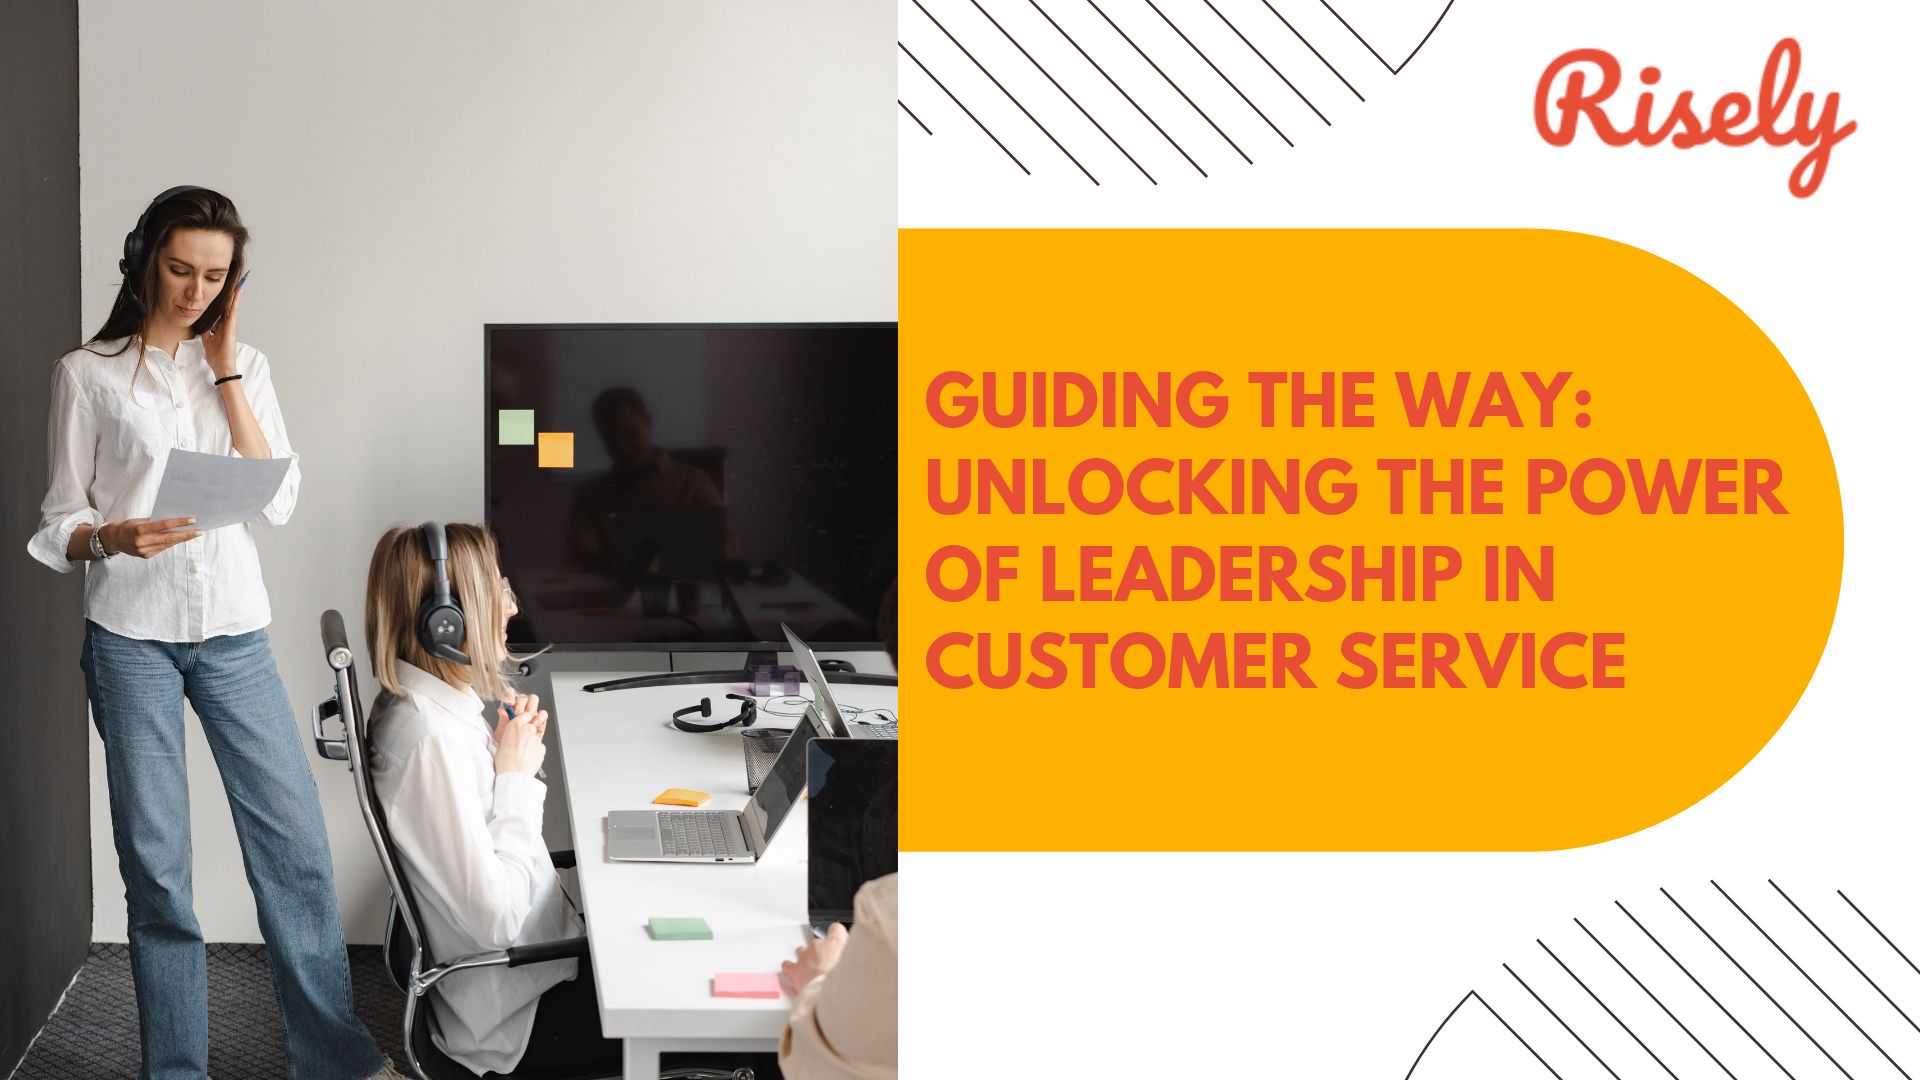 Guiding the Way: Unlocking the Power of Leadership in Customer Service